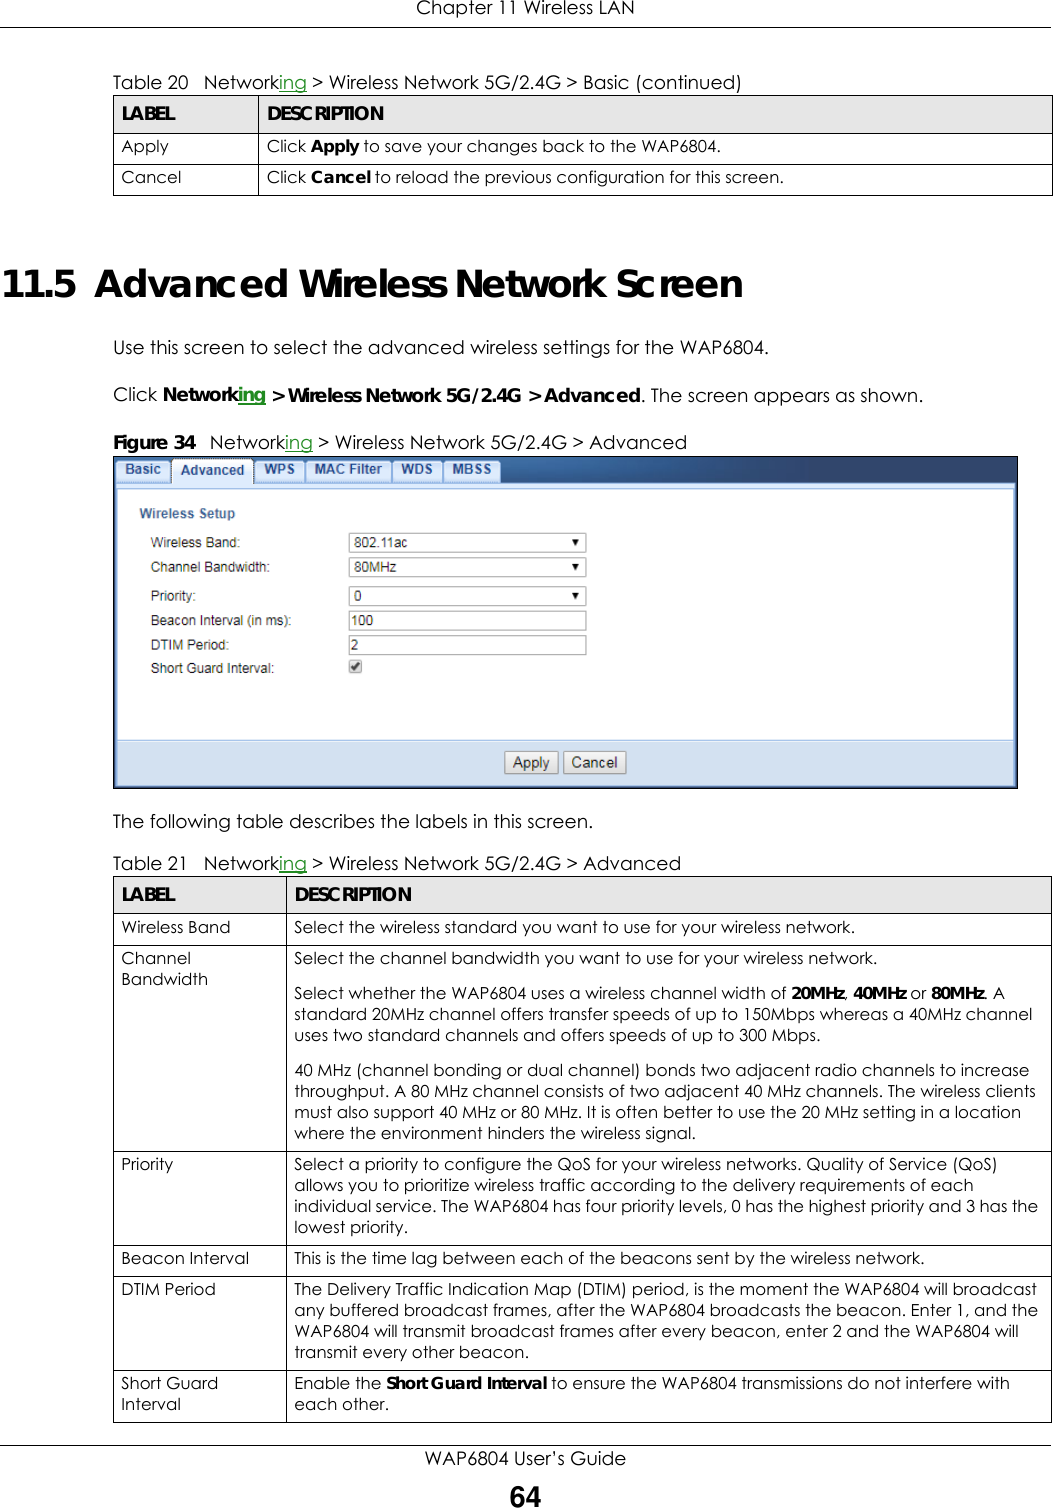 Chapter 11 Wireless LANWAP6804 User’s Guide6411.5  Advanced Wireless Network ScreenUse this screen to select the advanced wireless settings for the WAP6804.Click Networking &gt; Wireless Network 5G/2.4G &gt; Advanced. The screen appears as shown.Figure 34   Networking &gt; Wireless Network 5G/2.4G &gt; Advanced  The following table describes the labels in this screen. Apply Click Apply to save your changes back to the WAP6804.Cancel Click Cancel to reload the previous configuration for this screen.Table 20   Networking &gt; Wireless Network 5G/2.4G &gt; Basic (continued)LABEL DESCRIPTIONTable 21   Networking &gt; Wireless Network 5G/2.4G &gt; AdvancedLABEL DESCRIPTIONWireless Band Select the wireless standard you want to use for your wireless network.Channel BandwidthSelect the channel bandwidth you want to use for your wireless network.Select whether the WAP6804 uses a wireless channel width of 20MHz, 40MHz or 80MHz. A standard 20MHz channel offers transfer speeds of up to 150Mbps whereas a 40MHz channel uses two standard channels and offers speeds of up to 300 Mbps. 40 MHz (channel bonding or dual channel) bonds two adjacent radio channels to increase throughput. A 80 MHz channel consists of two adjacent 40 MHz channels. The wireless clients must also support 40 MHz or 80 MHz. It is often better to use the 20 MHz setting in a location where the environment hinders the wireless signal.Priority Select a priority to configure the QoS for your wireless networks. Quality of Service (QoS) allows you to prioritize wireless traffic according to the delivery requirements of each individual service. The WAP6804 has four priority levels, 0 has the highest priority and 3 has the lowest priority.Beacon Interval This is the time lag between each of the beacons sent by the wireless network.DTIM Period The Delivery Traffic Indication Map (DTIM) period, is the moment the WAP6804 will broadcast any buffered broadcast frames, after the WAP6804 broadcasts the beacon. Enter 1, and the WAP6804 will transmit broadcast frames after every beacon, enter 2 and the WAP6804 will transmit every other beacon.Short Guard IntervalEnable the Short Guard Interval to ensure the WAP6804 transmissions do not interfere with each other.